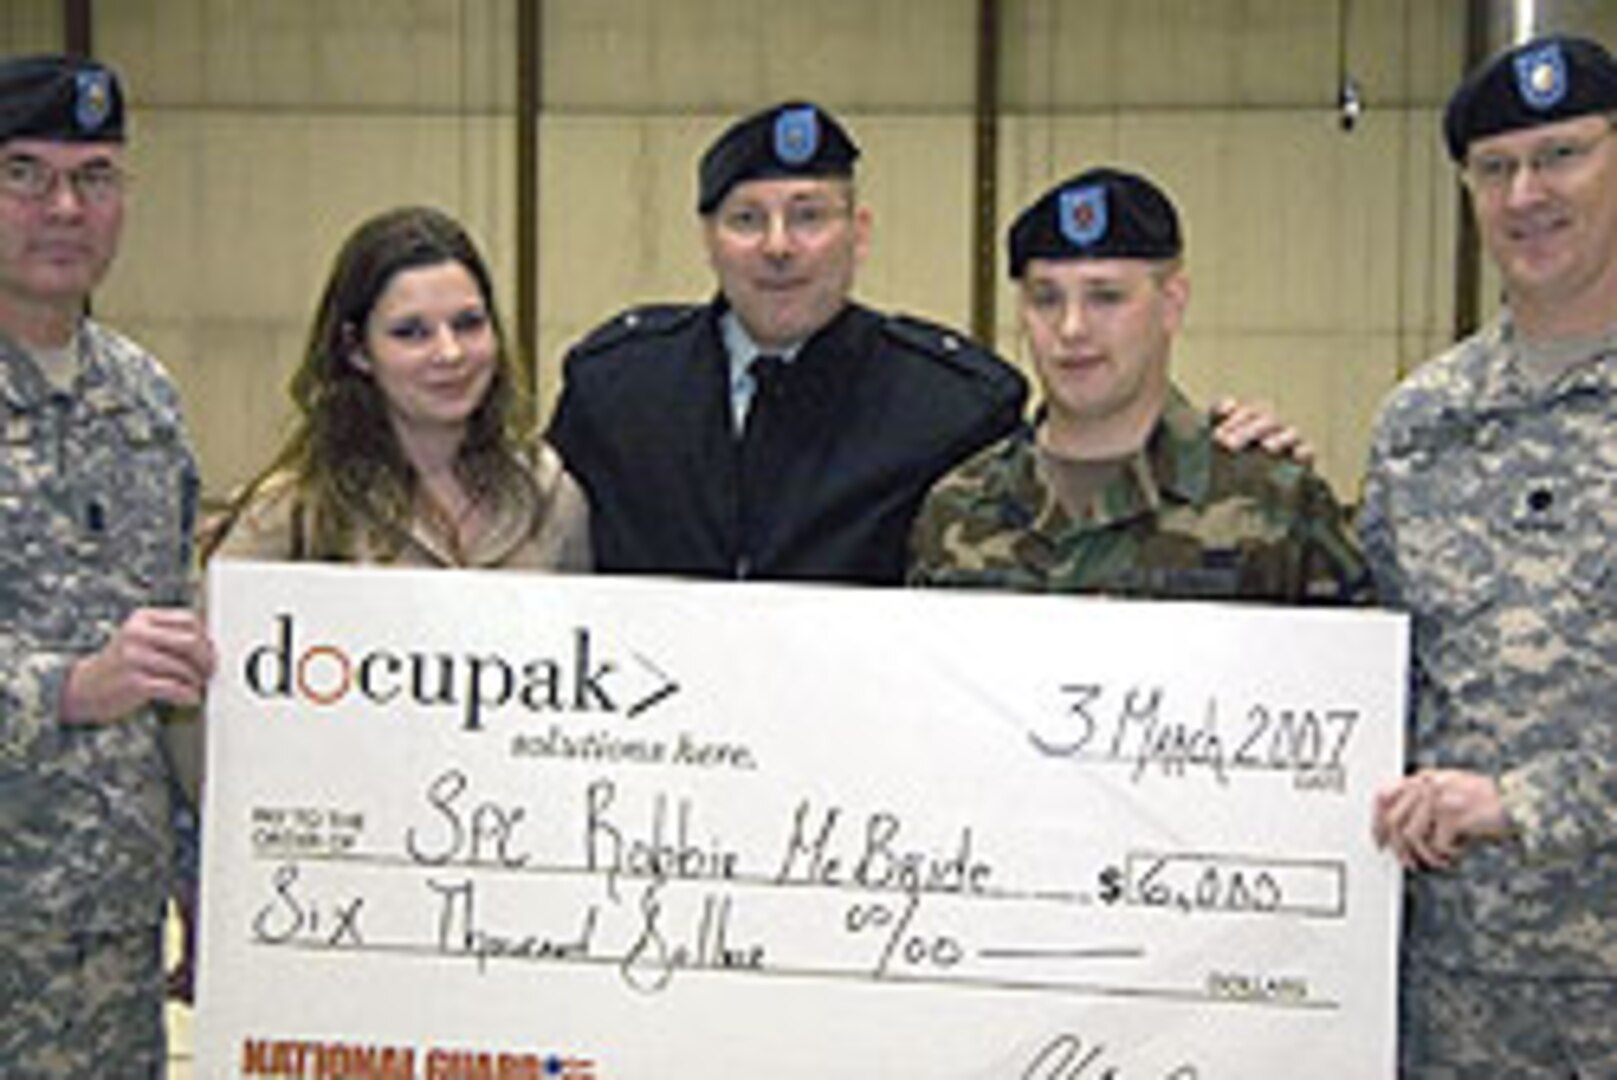 Spc. Robbie McBride (fourth from left), a member of the 237th Personnel Services Battalion, receives a ceremonial check for $6,000 for six successful enlistment referrals into the Ohio Army National Guard from Command Sgt. Maj. Bill Gilliam (far left), Ohio command sergeant major; Brig. Gen. Matthew L. Kambic (center), Ohio assistant adjutant general for Army; and Lt. Col. Steve Stivers (right), 237th PSB commander. Also pictured is McBride's wife, Carissa (second from left).